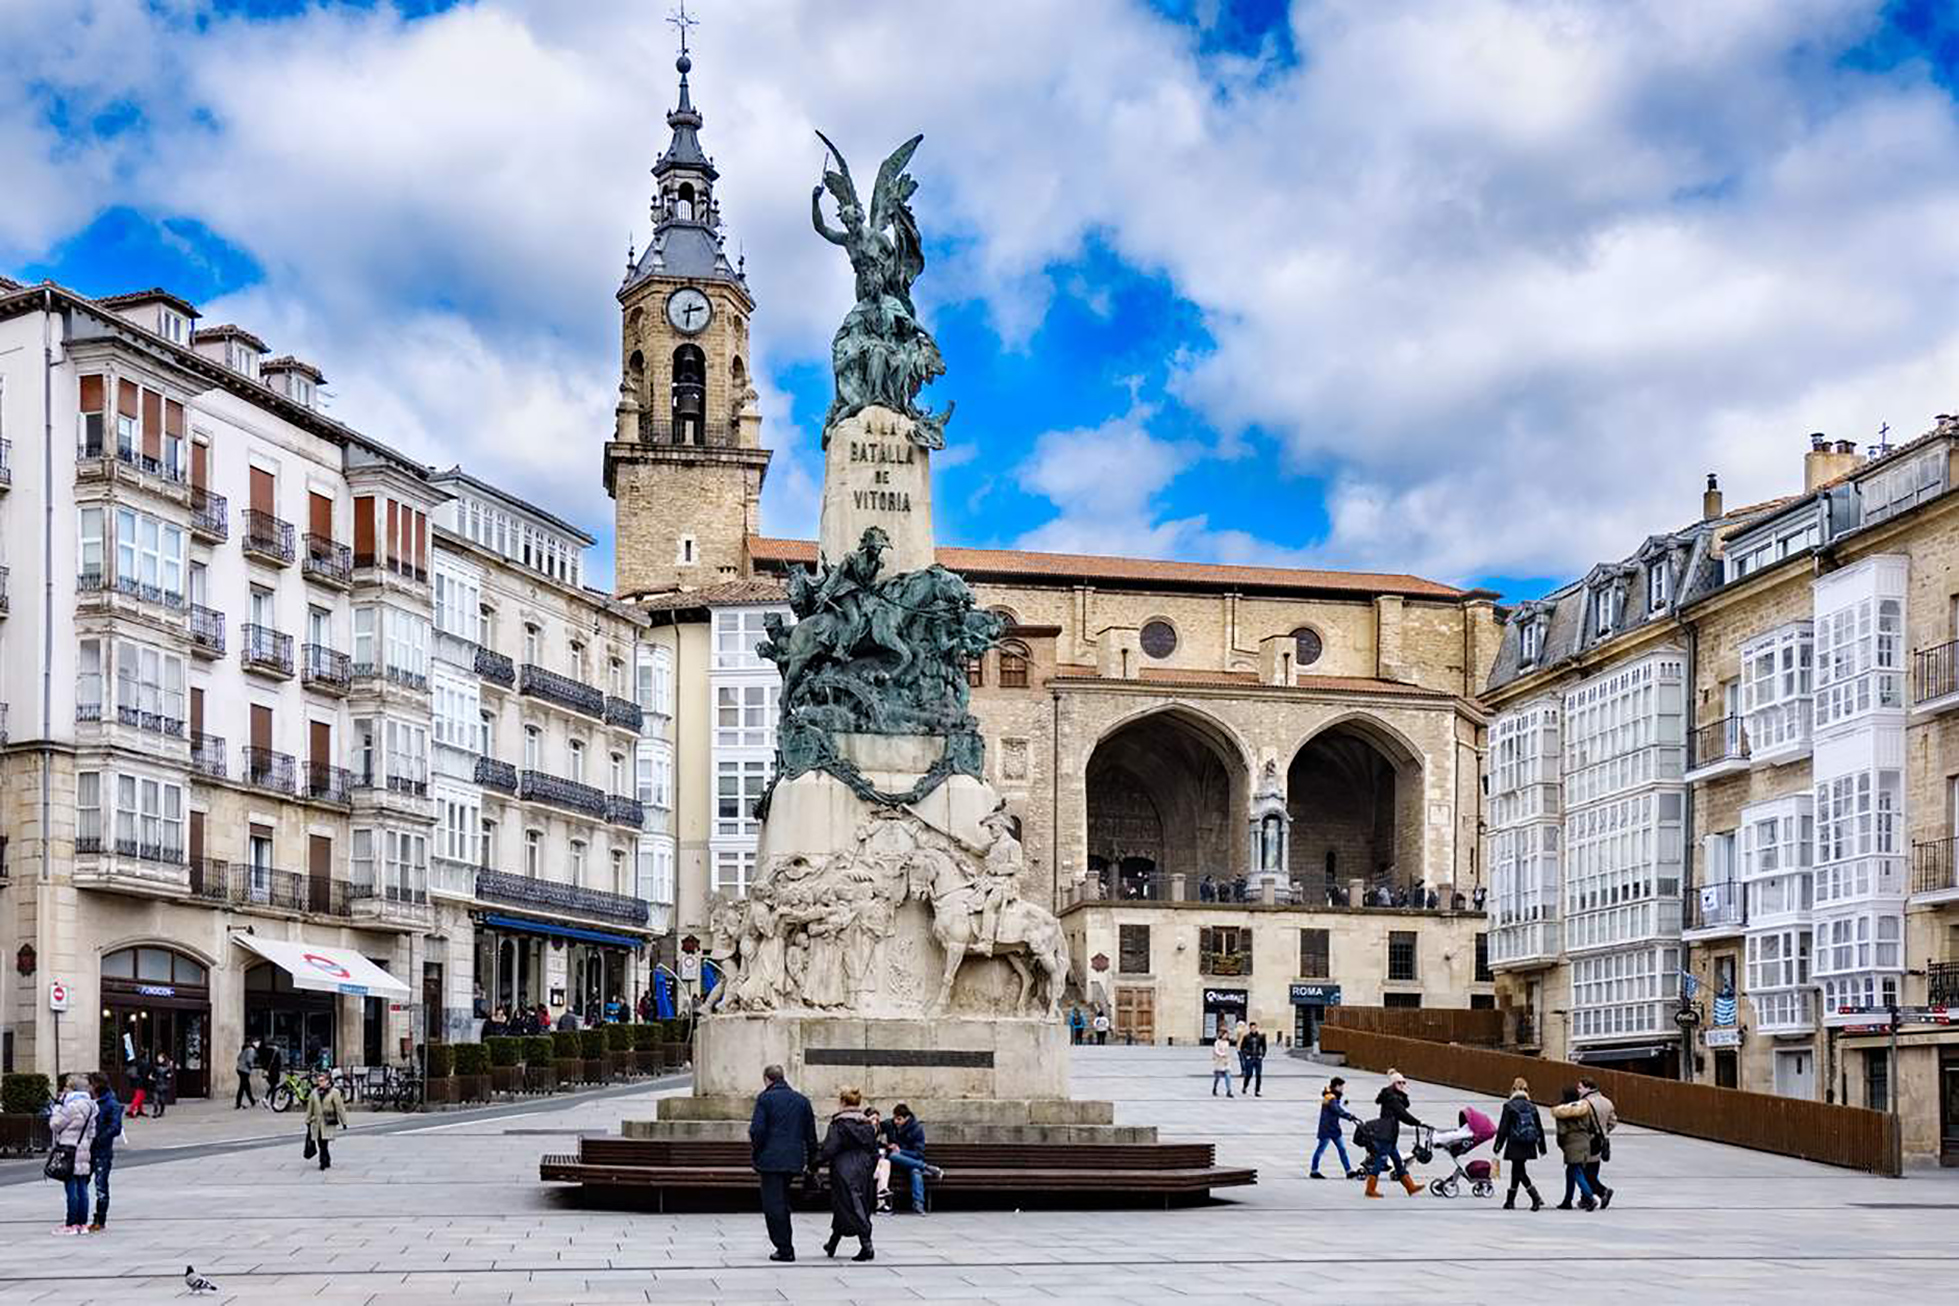 Vitoria among the world’s best destinations, according to National Geographic